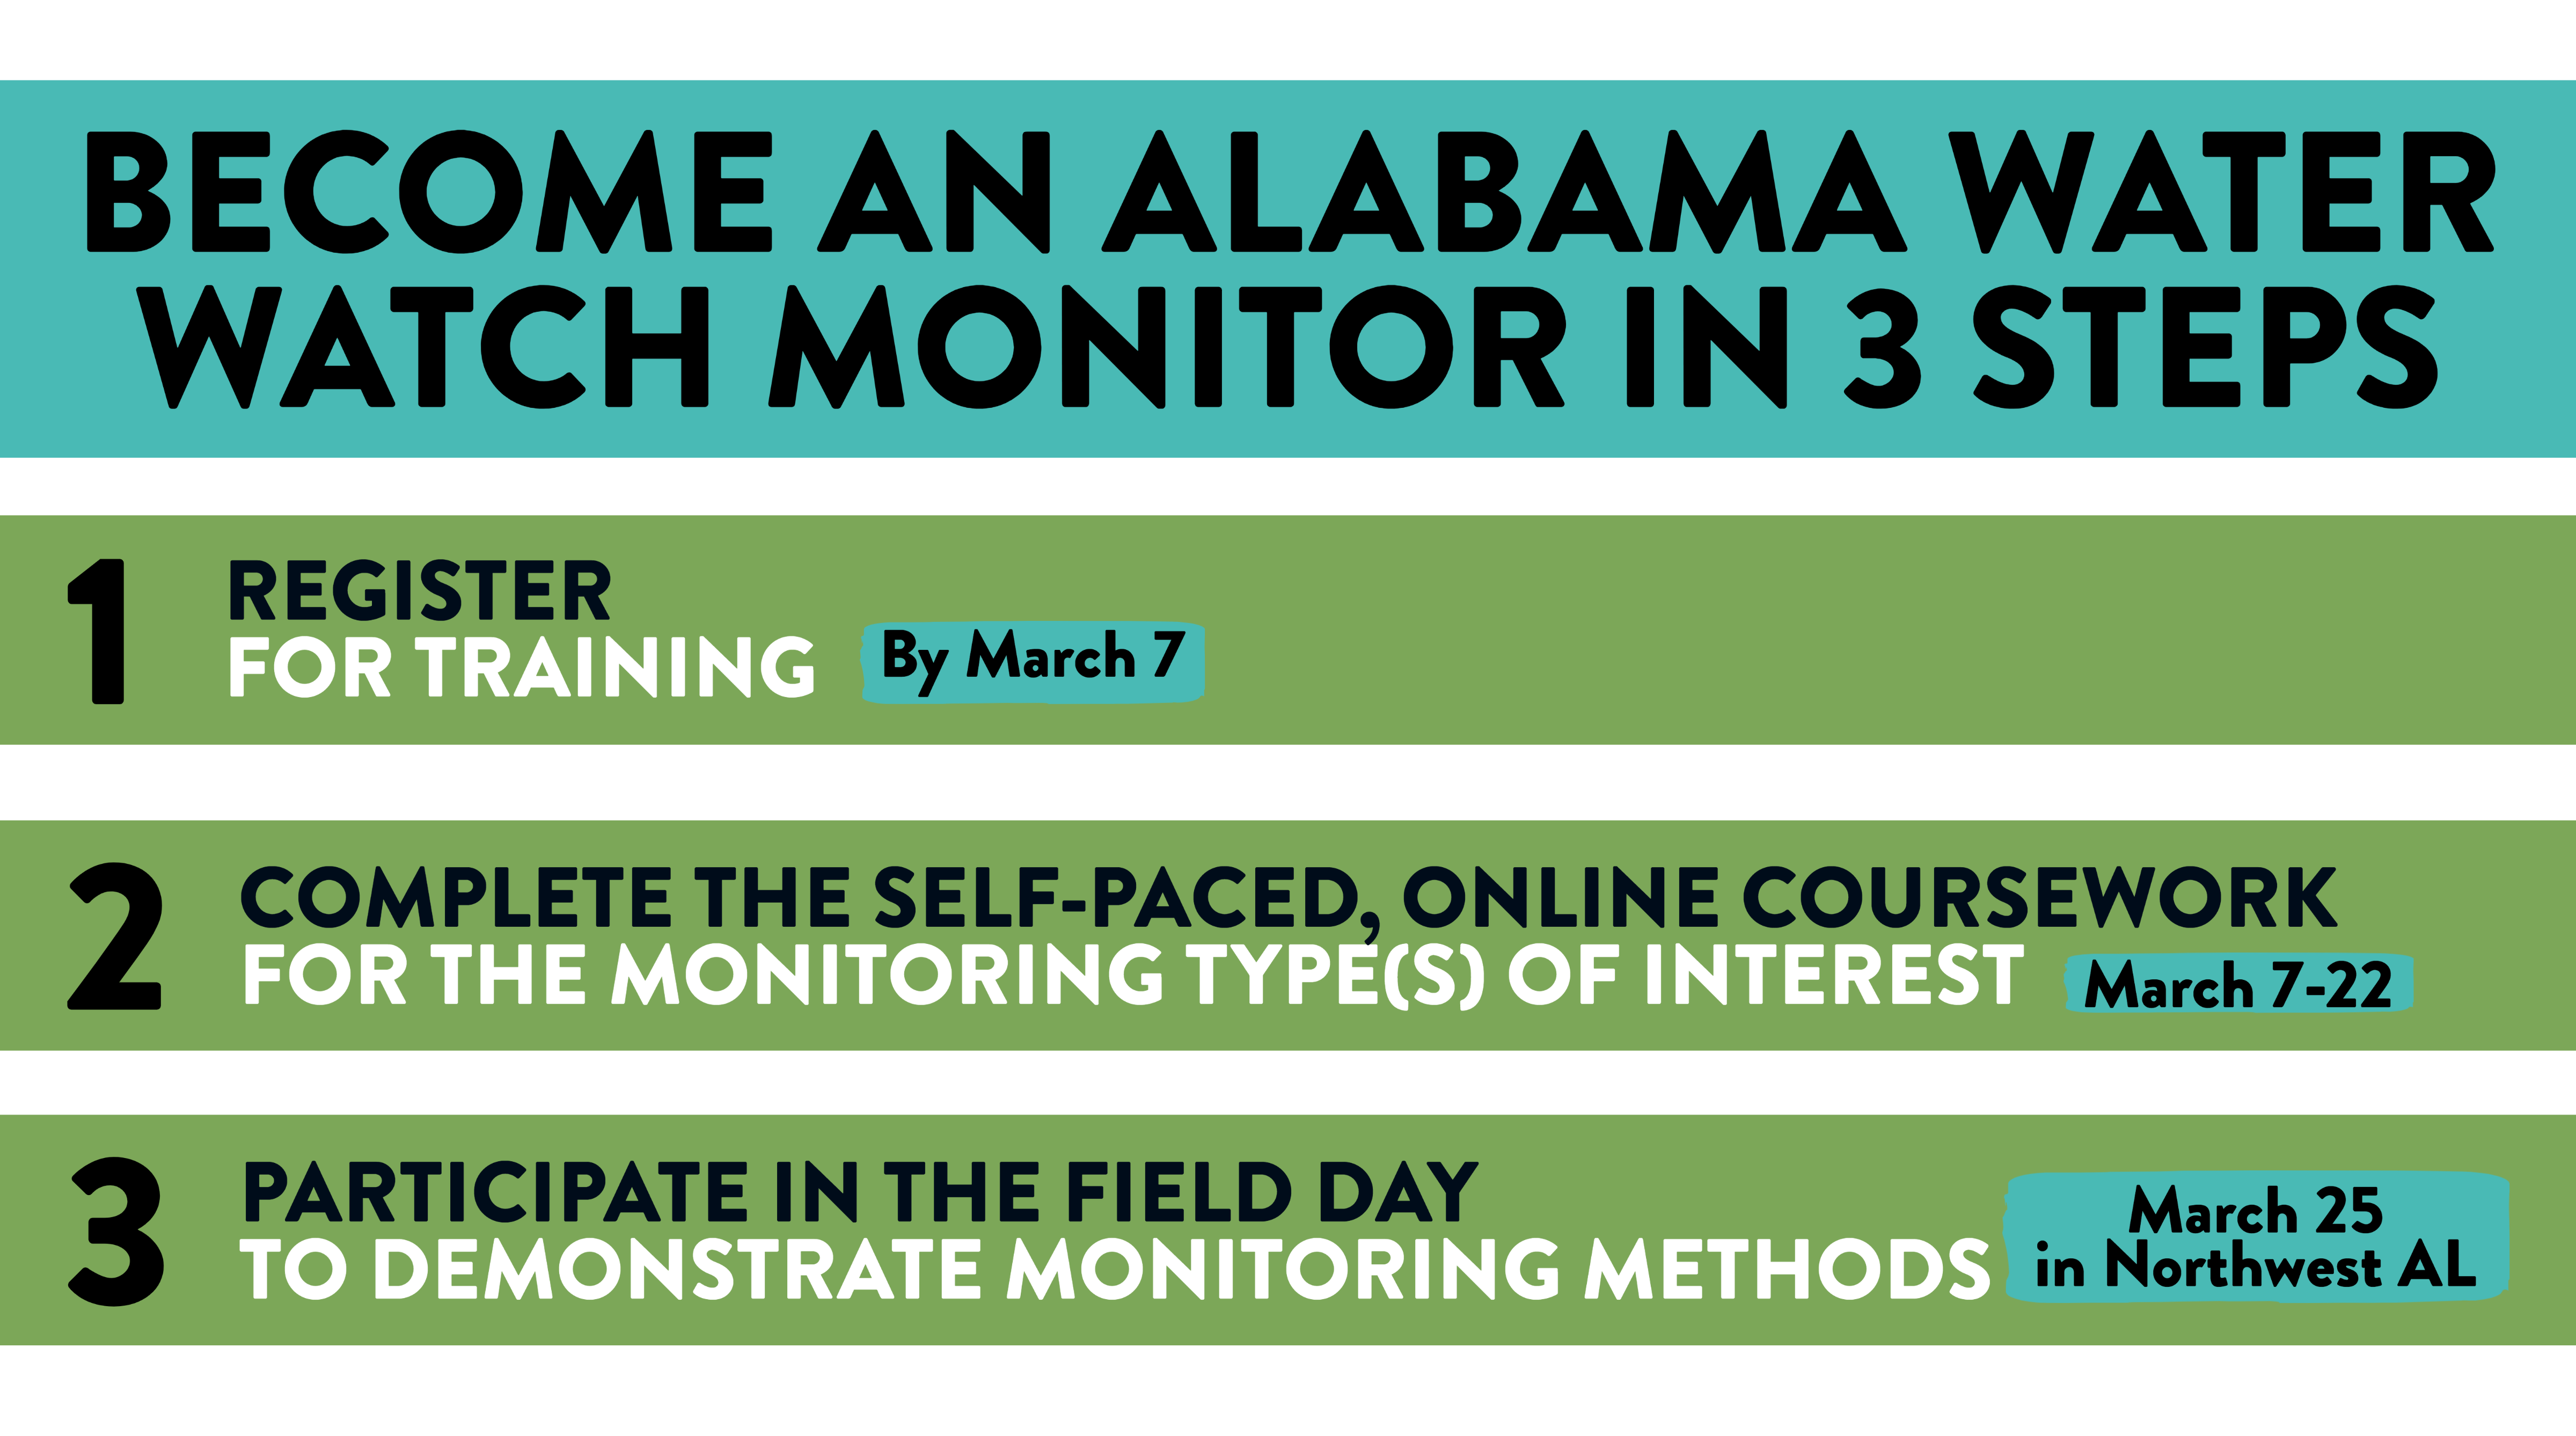 Become an AWW Monitor in 3 Steps - Northwest Alabama